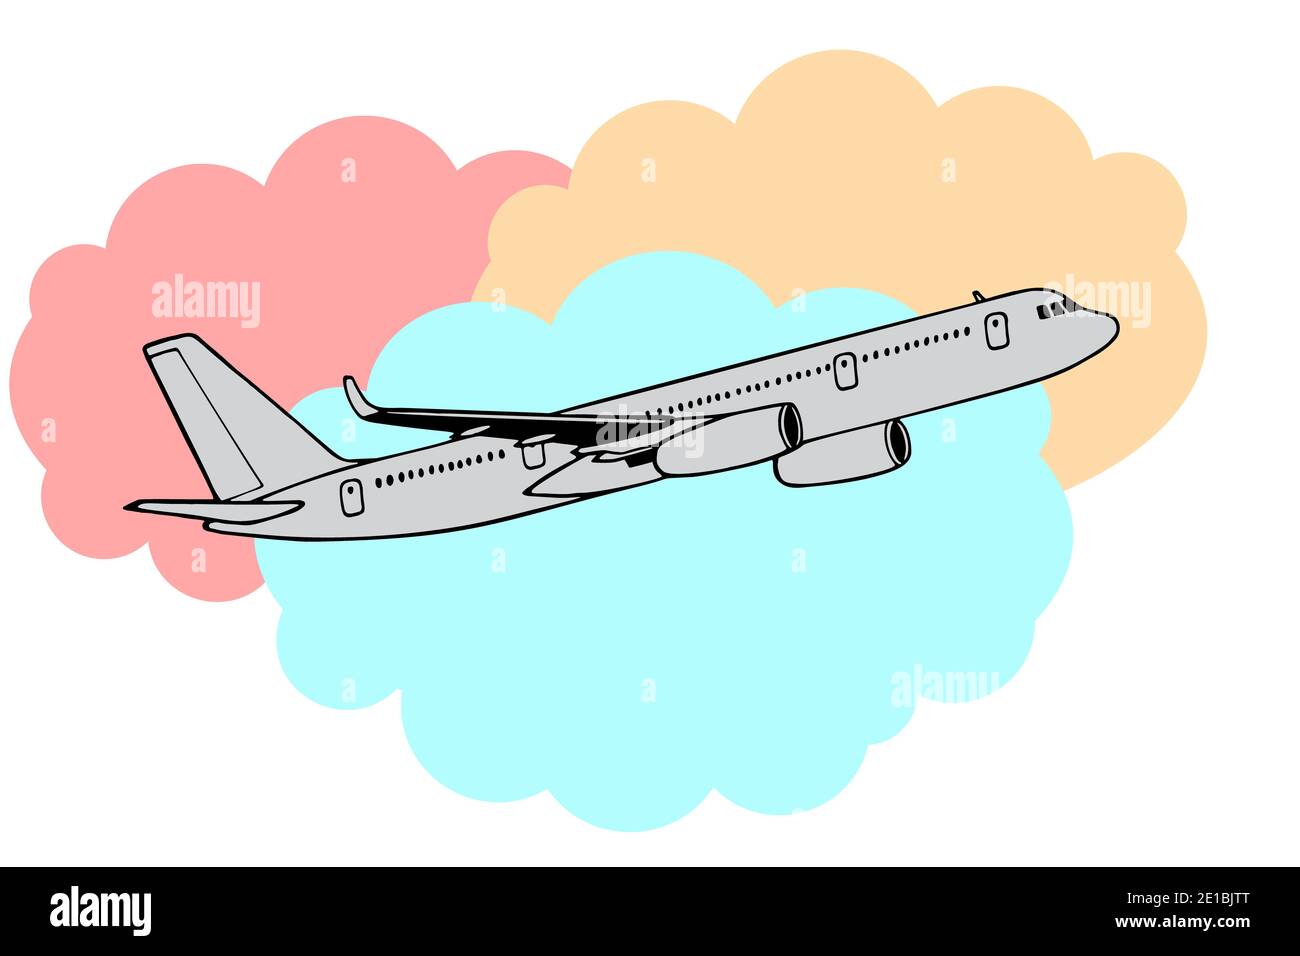 Jetliner hand drawn realistic doodle sketch tracing vector llustration. Airline Concept Travel Passenger plane. Jet commercial airplane against the ba Stock Photo